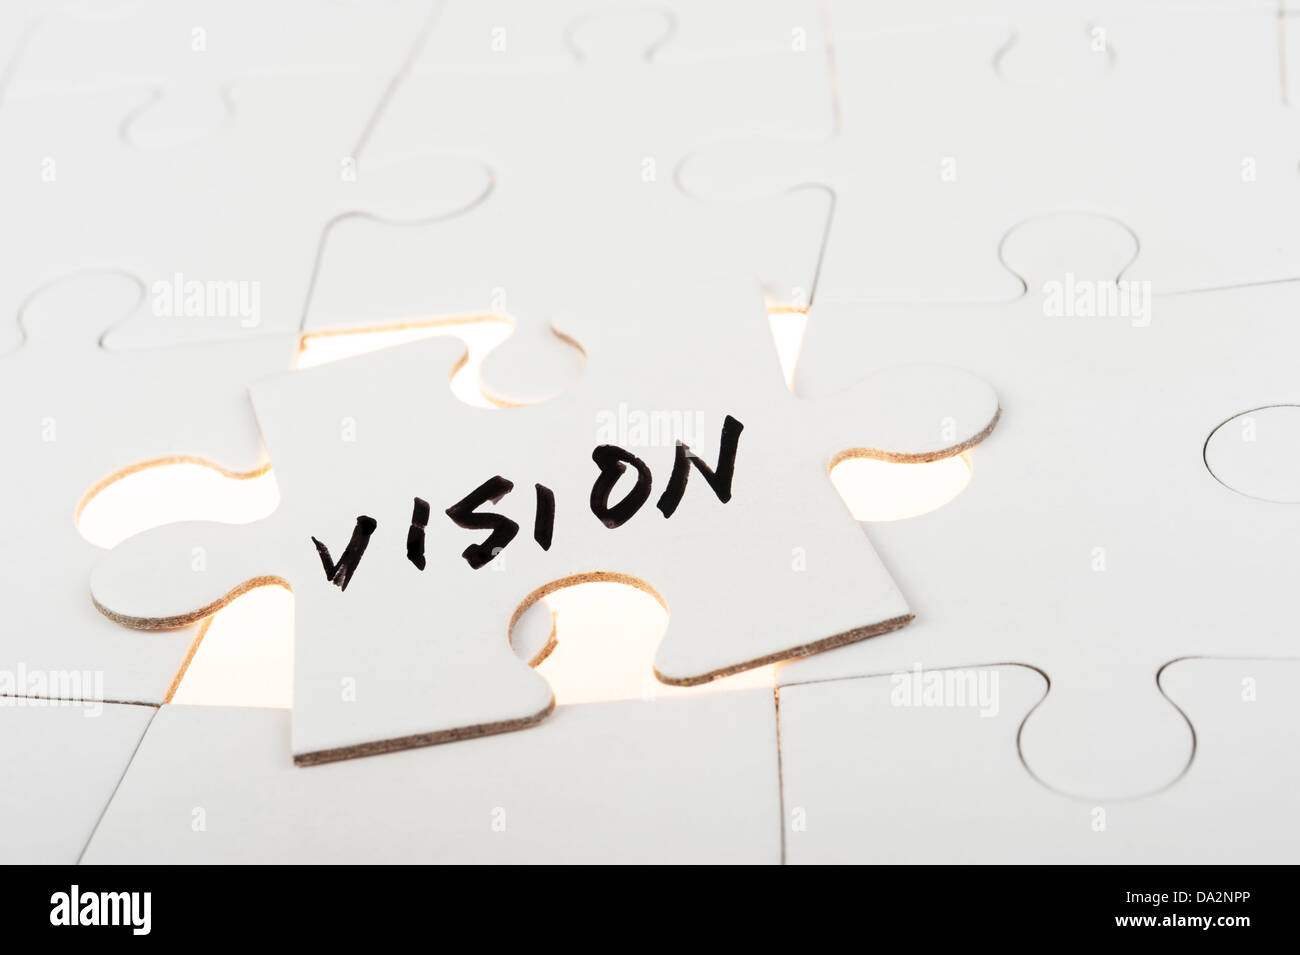 Vision word written on a piece of puzzle over group of paper jigsaw puzzles Stock Photo